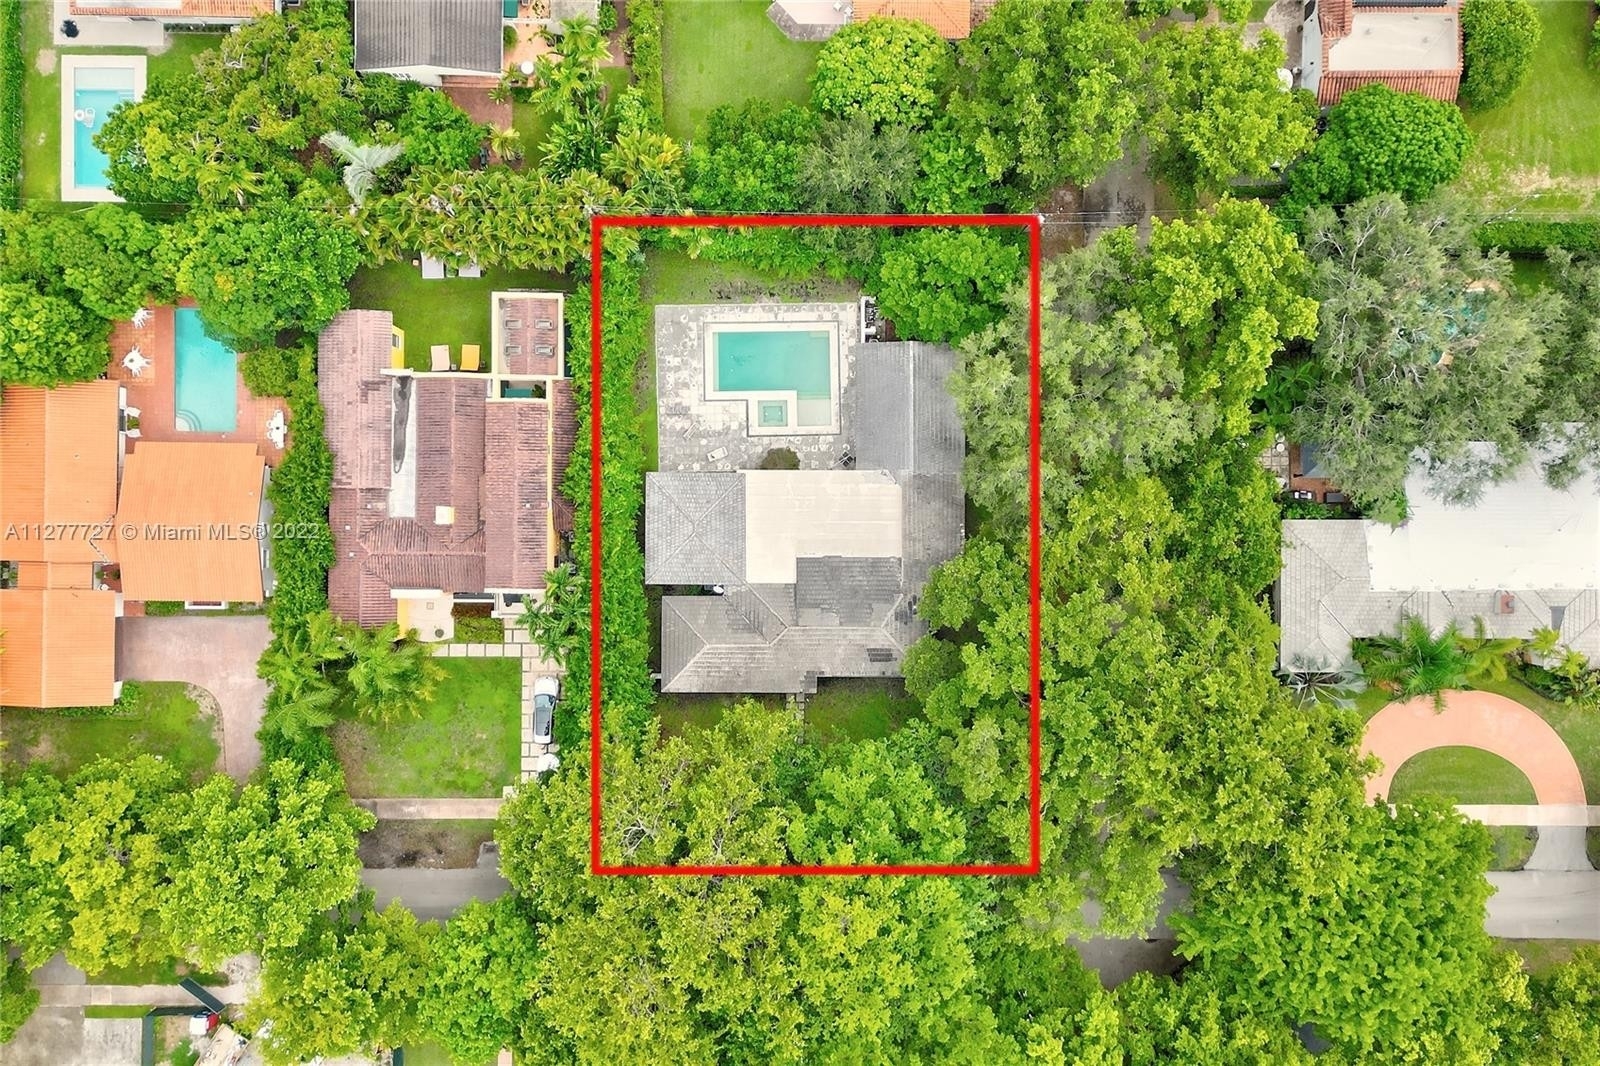 6. Land for Sale at Country Club Section, Coral Gables, FL 33134